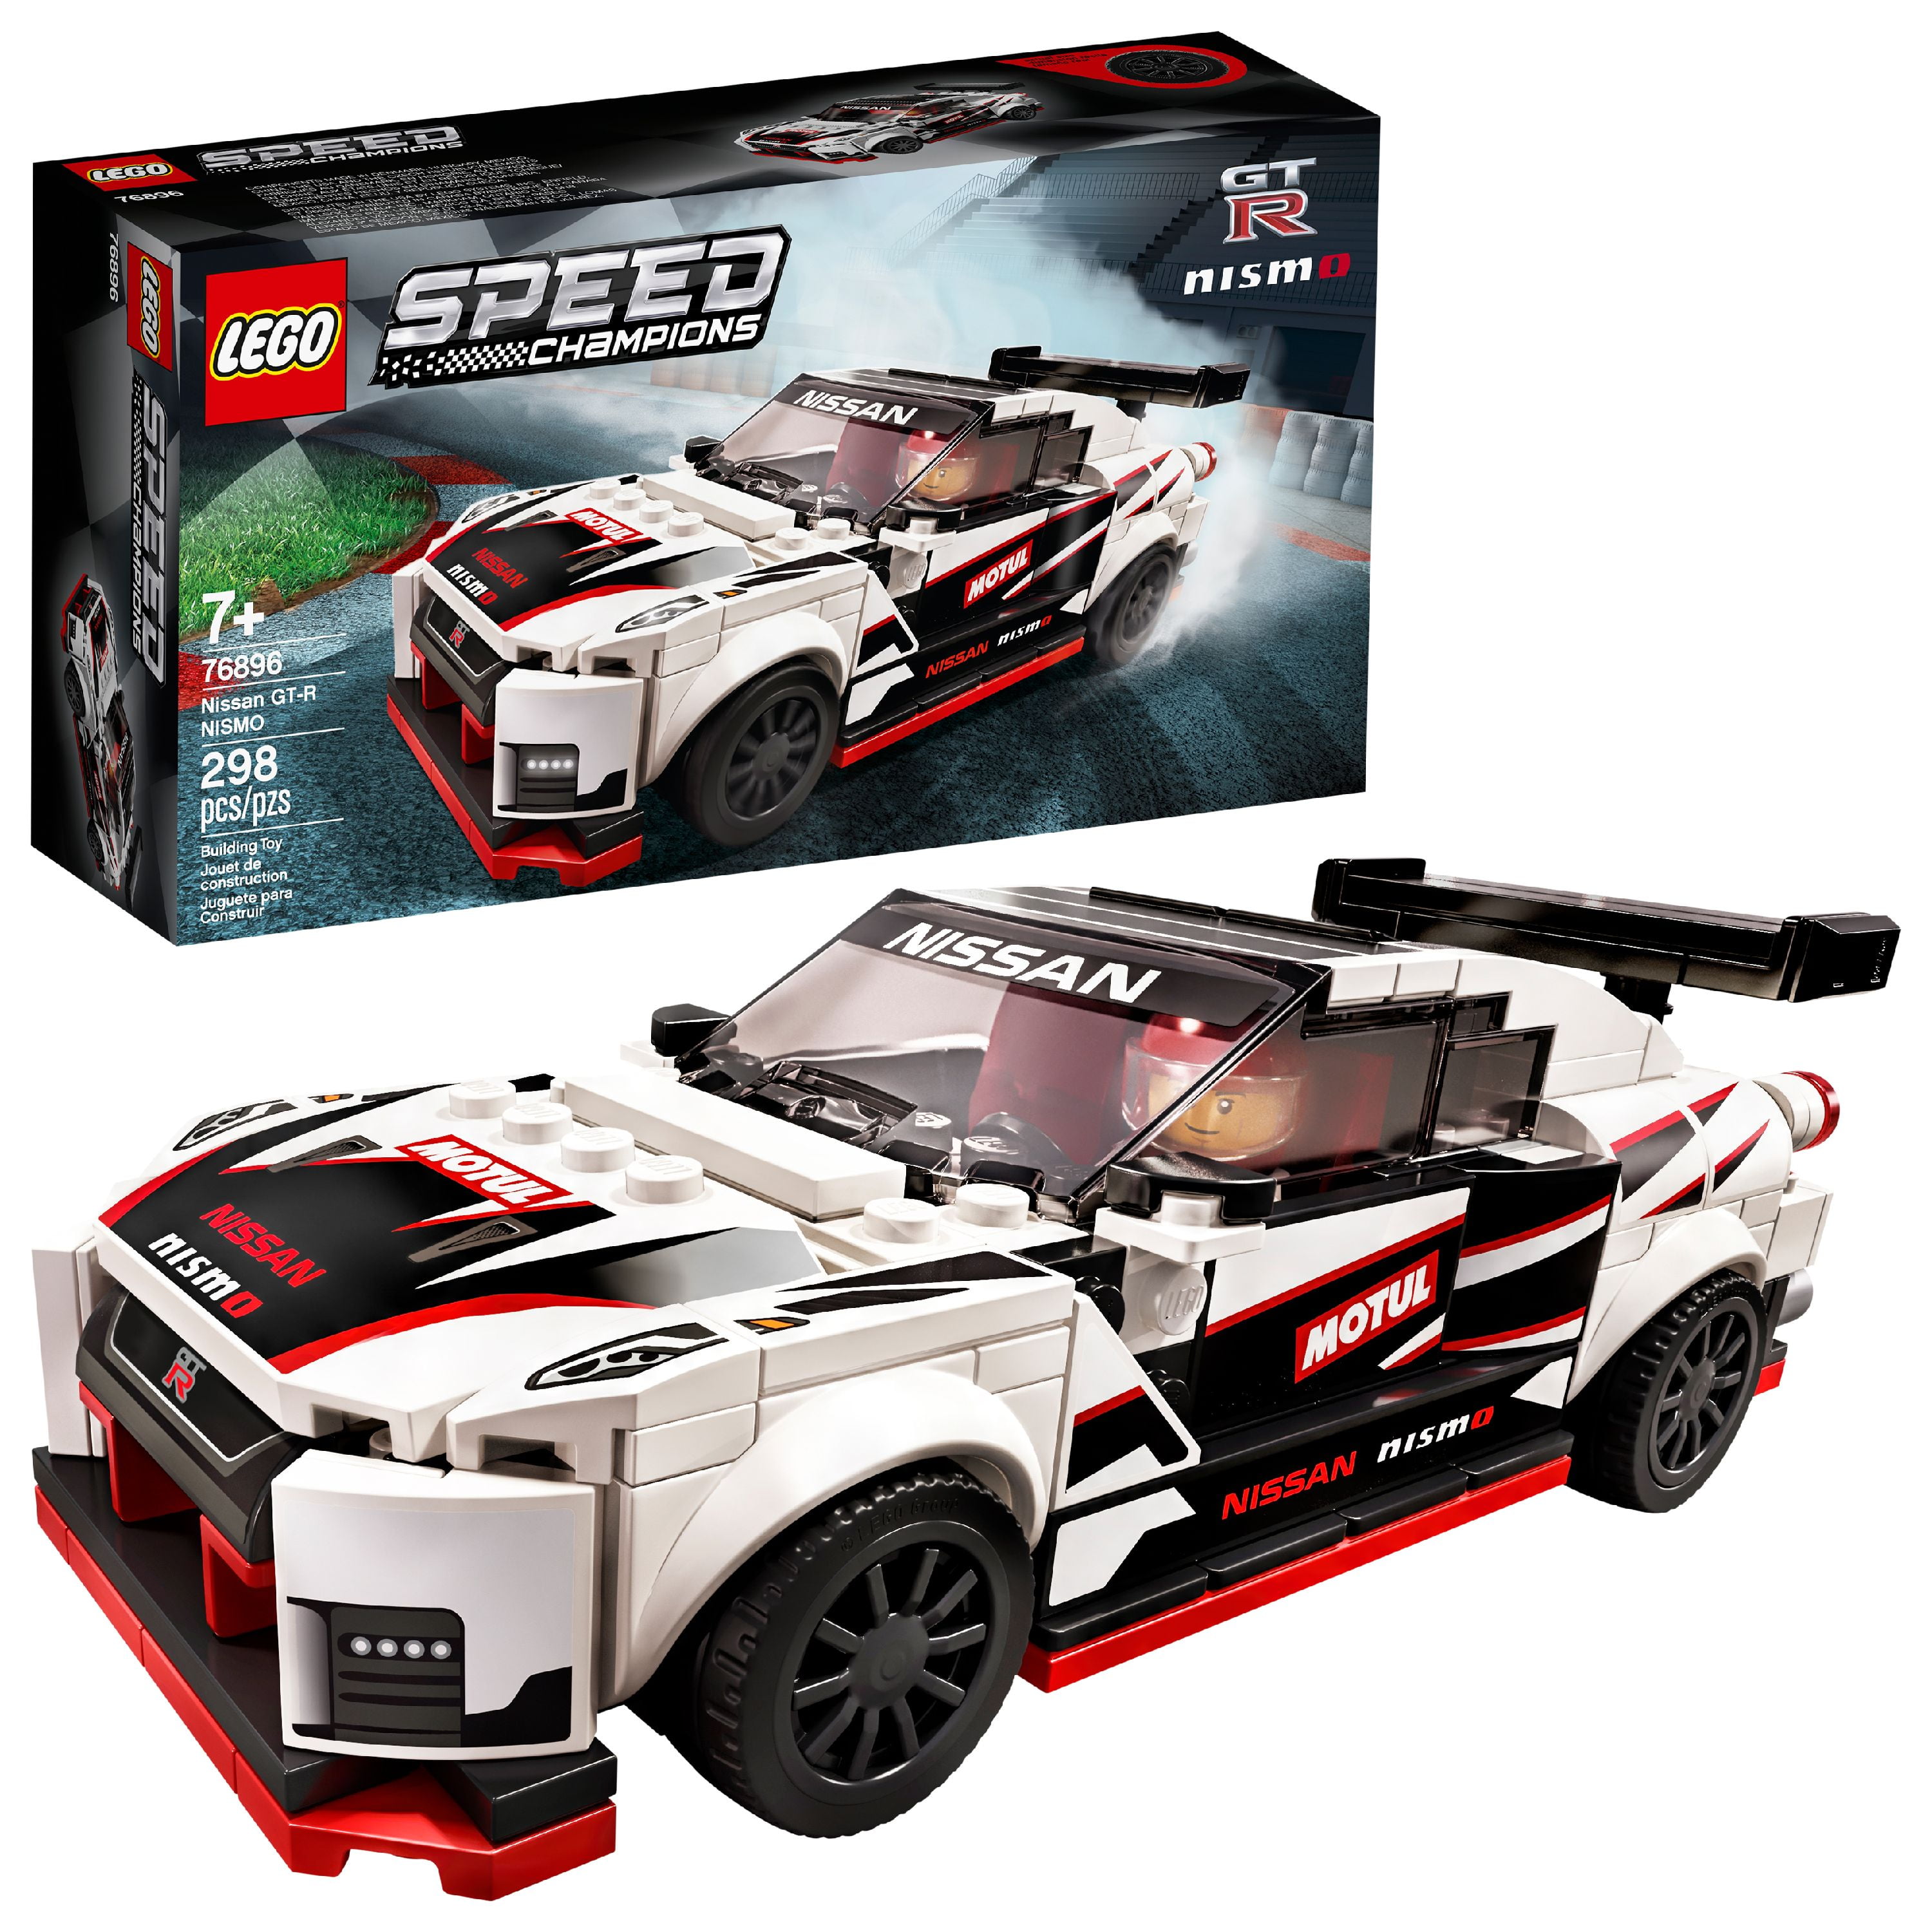 LEGO Speed Champions Nissan GT-R NISMO 76896 Toy Cars Kit (298 Pieces) -